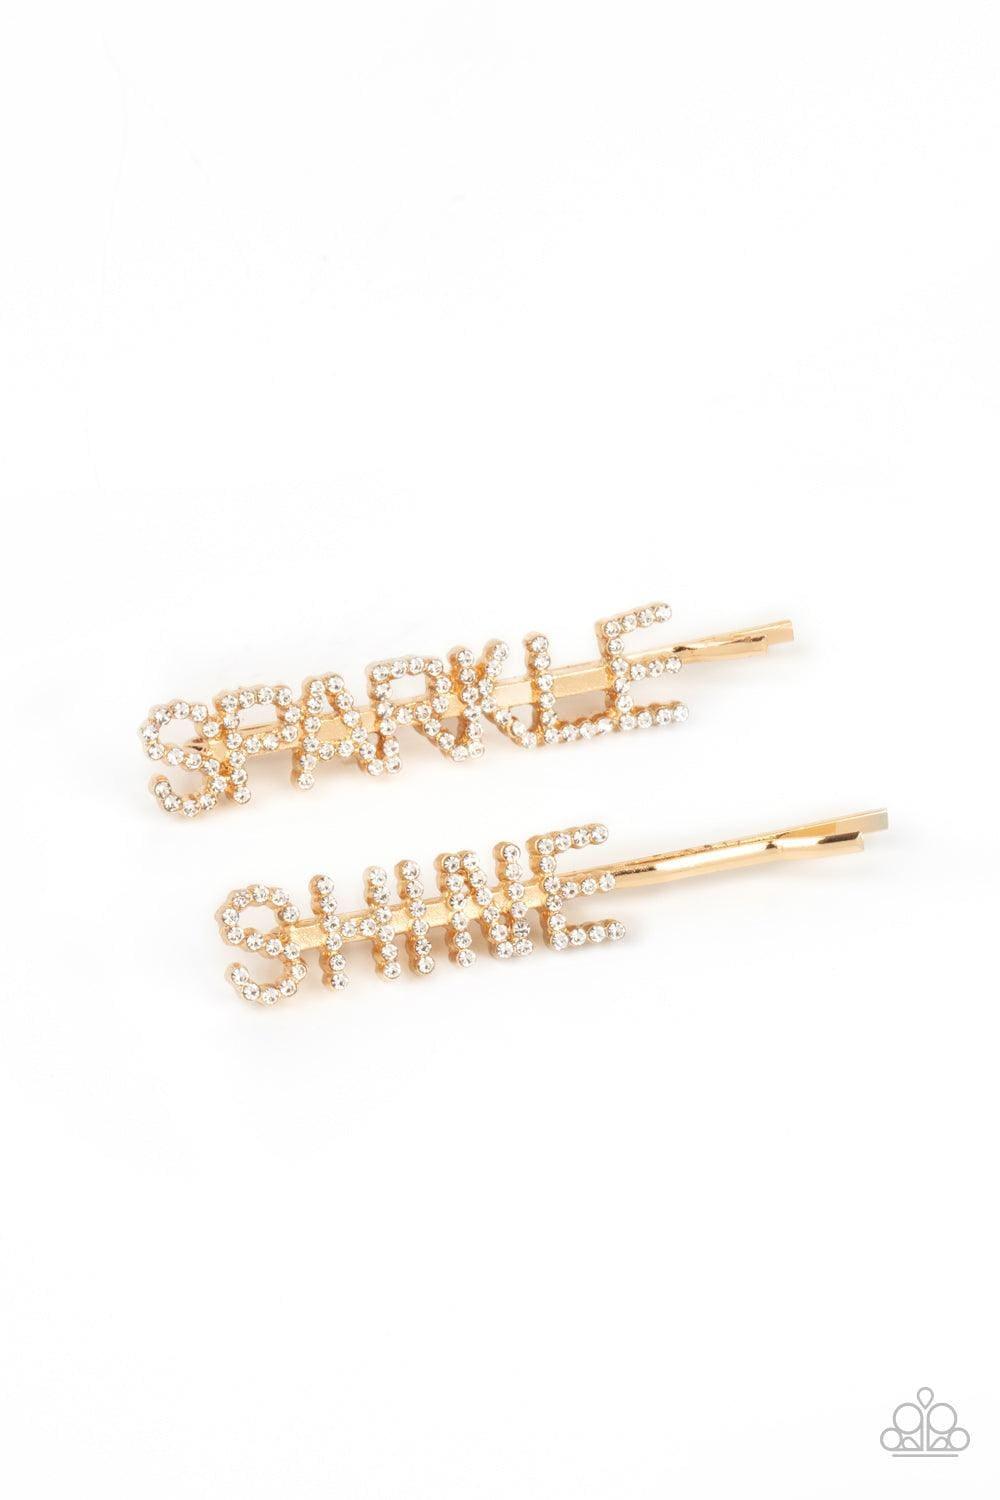 Paparazzi Accessories - Center Of The Sparkle-verse - Gold Hair Pins - Bling by JessieK